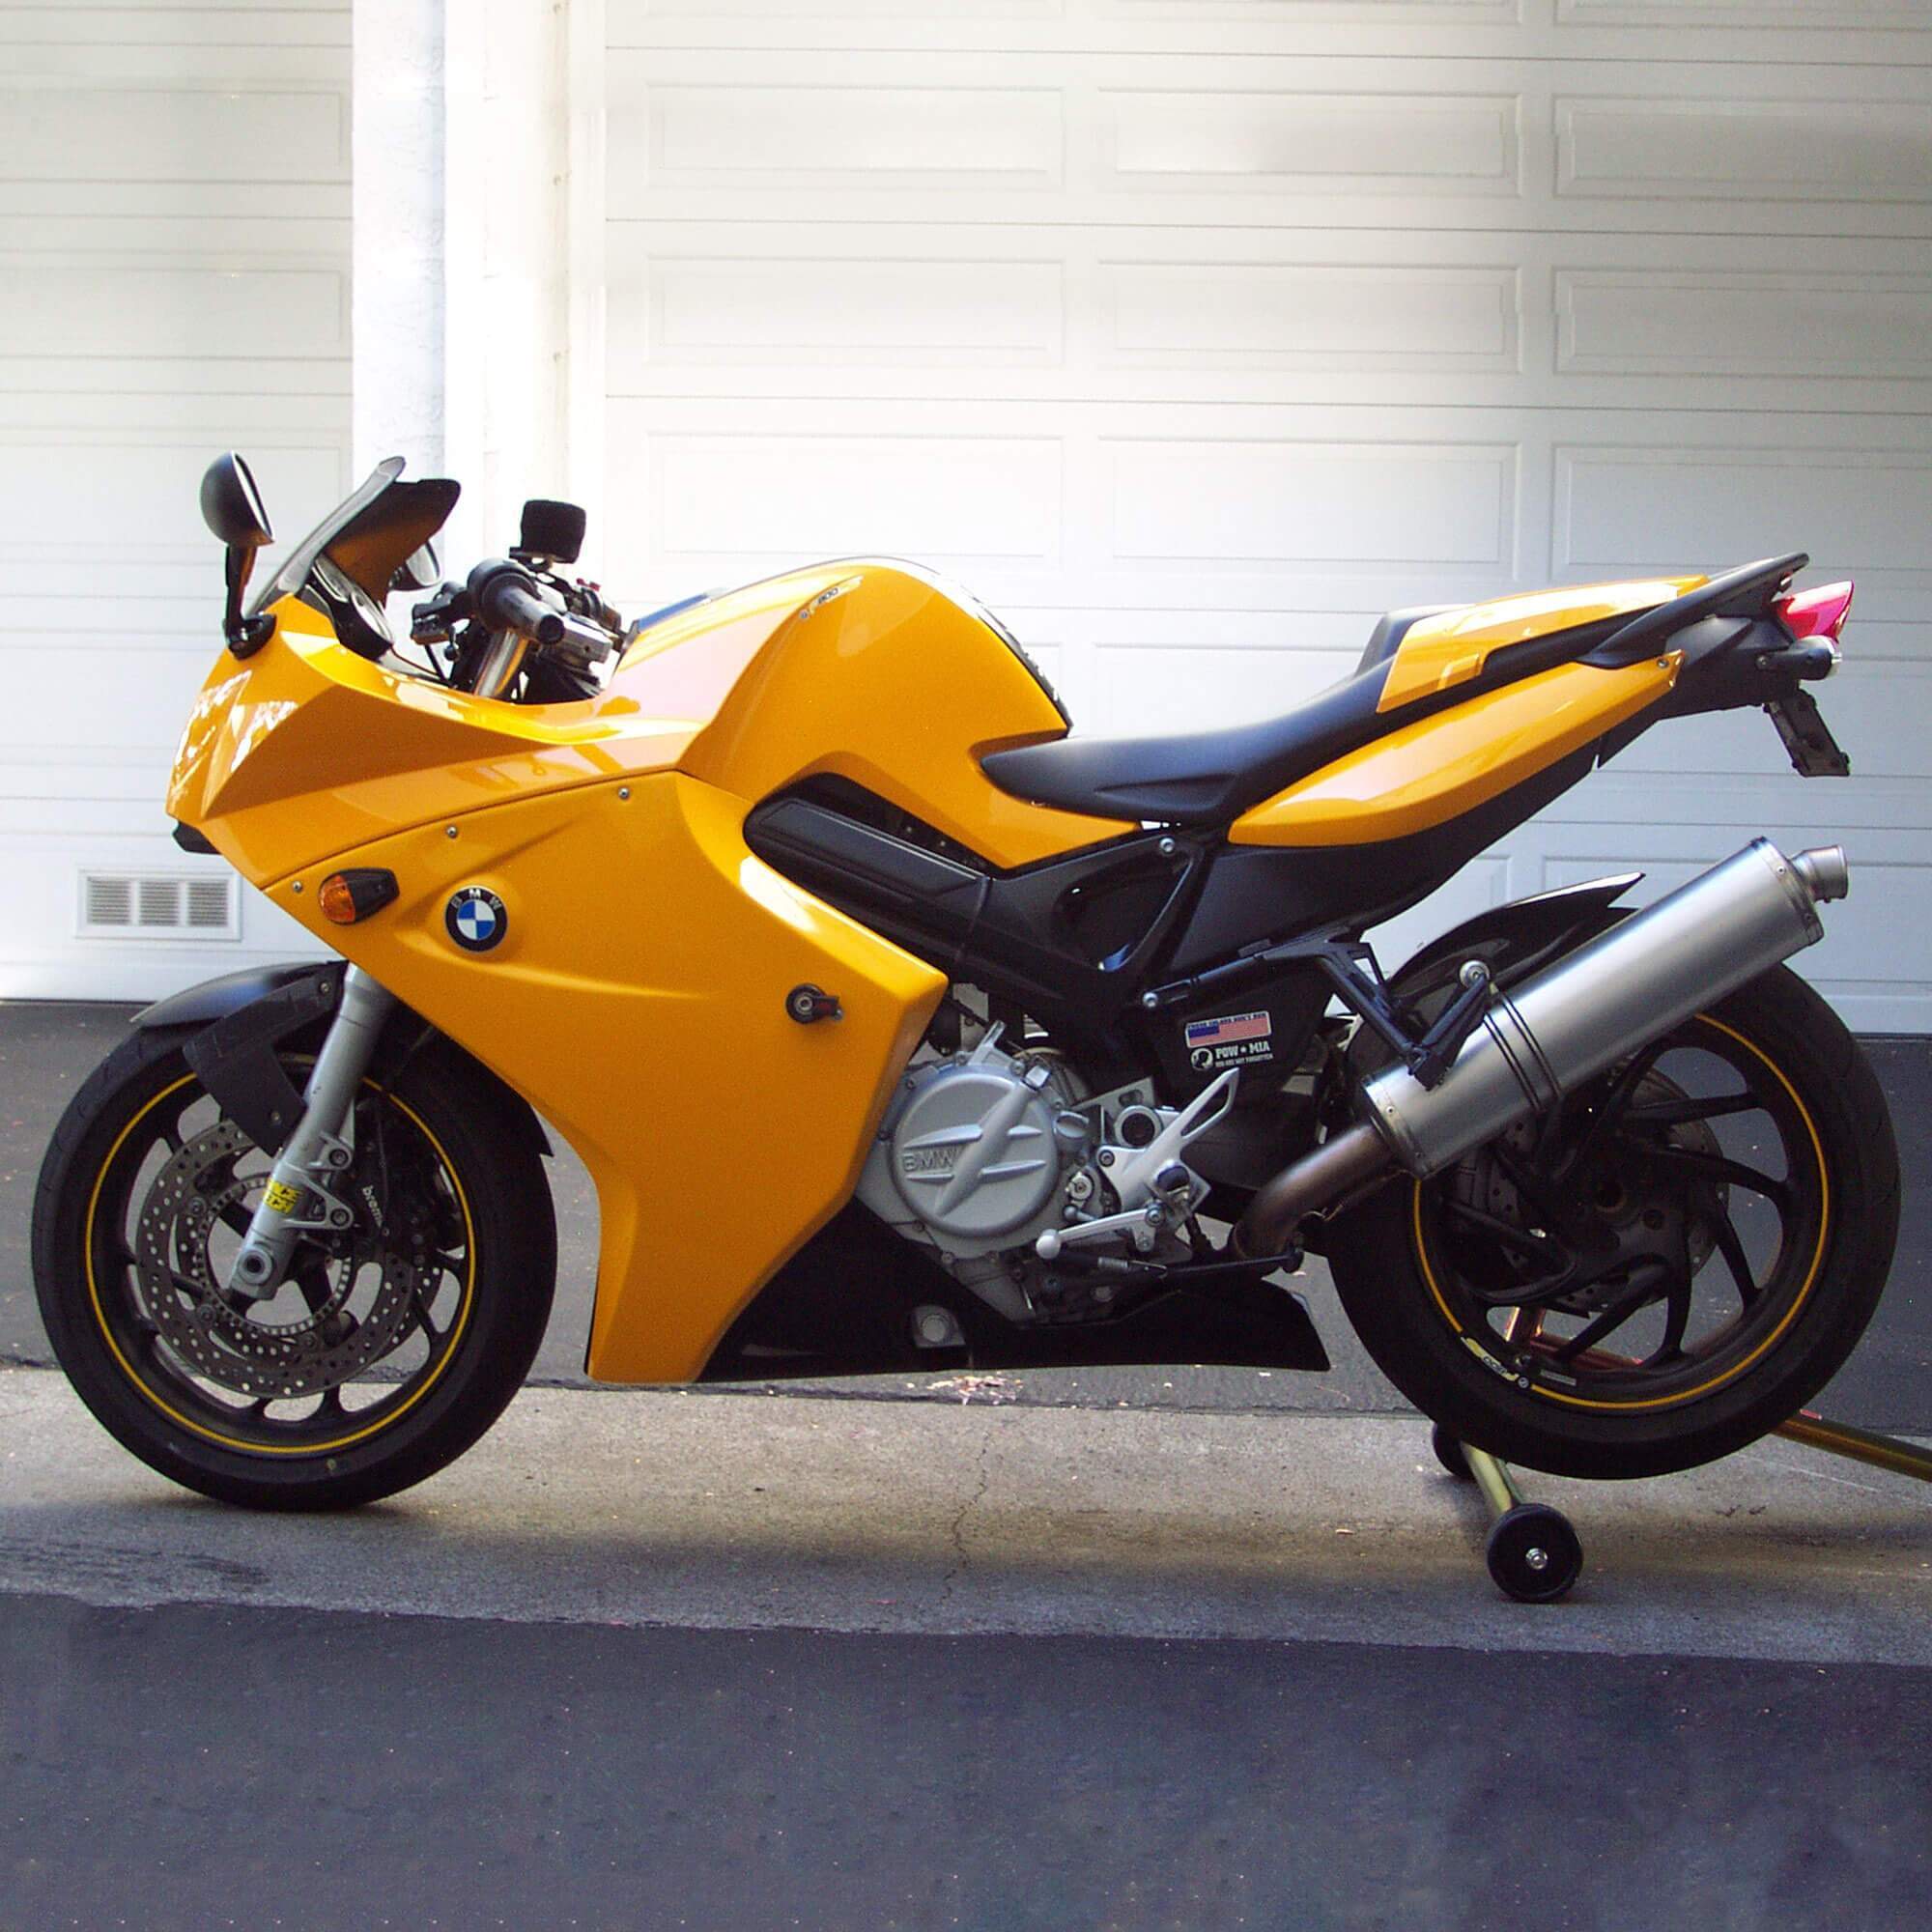 Pyramid Fairing Lowers | Gloss Yellow | BMW F800 S 2005>2012-245000E-Fairing Lowers-Pyramid Motorcycle Accessories